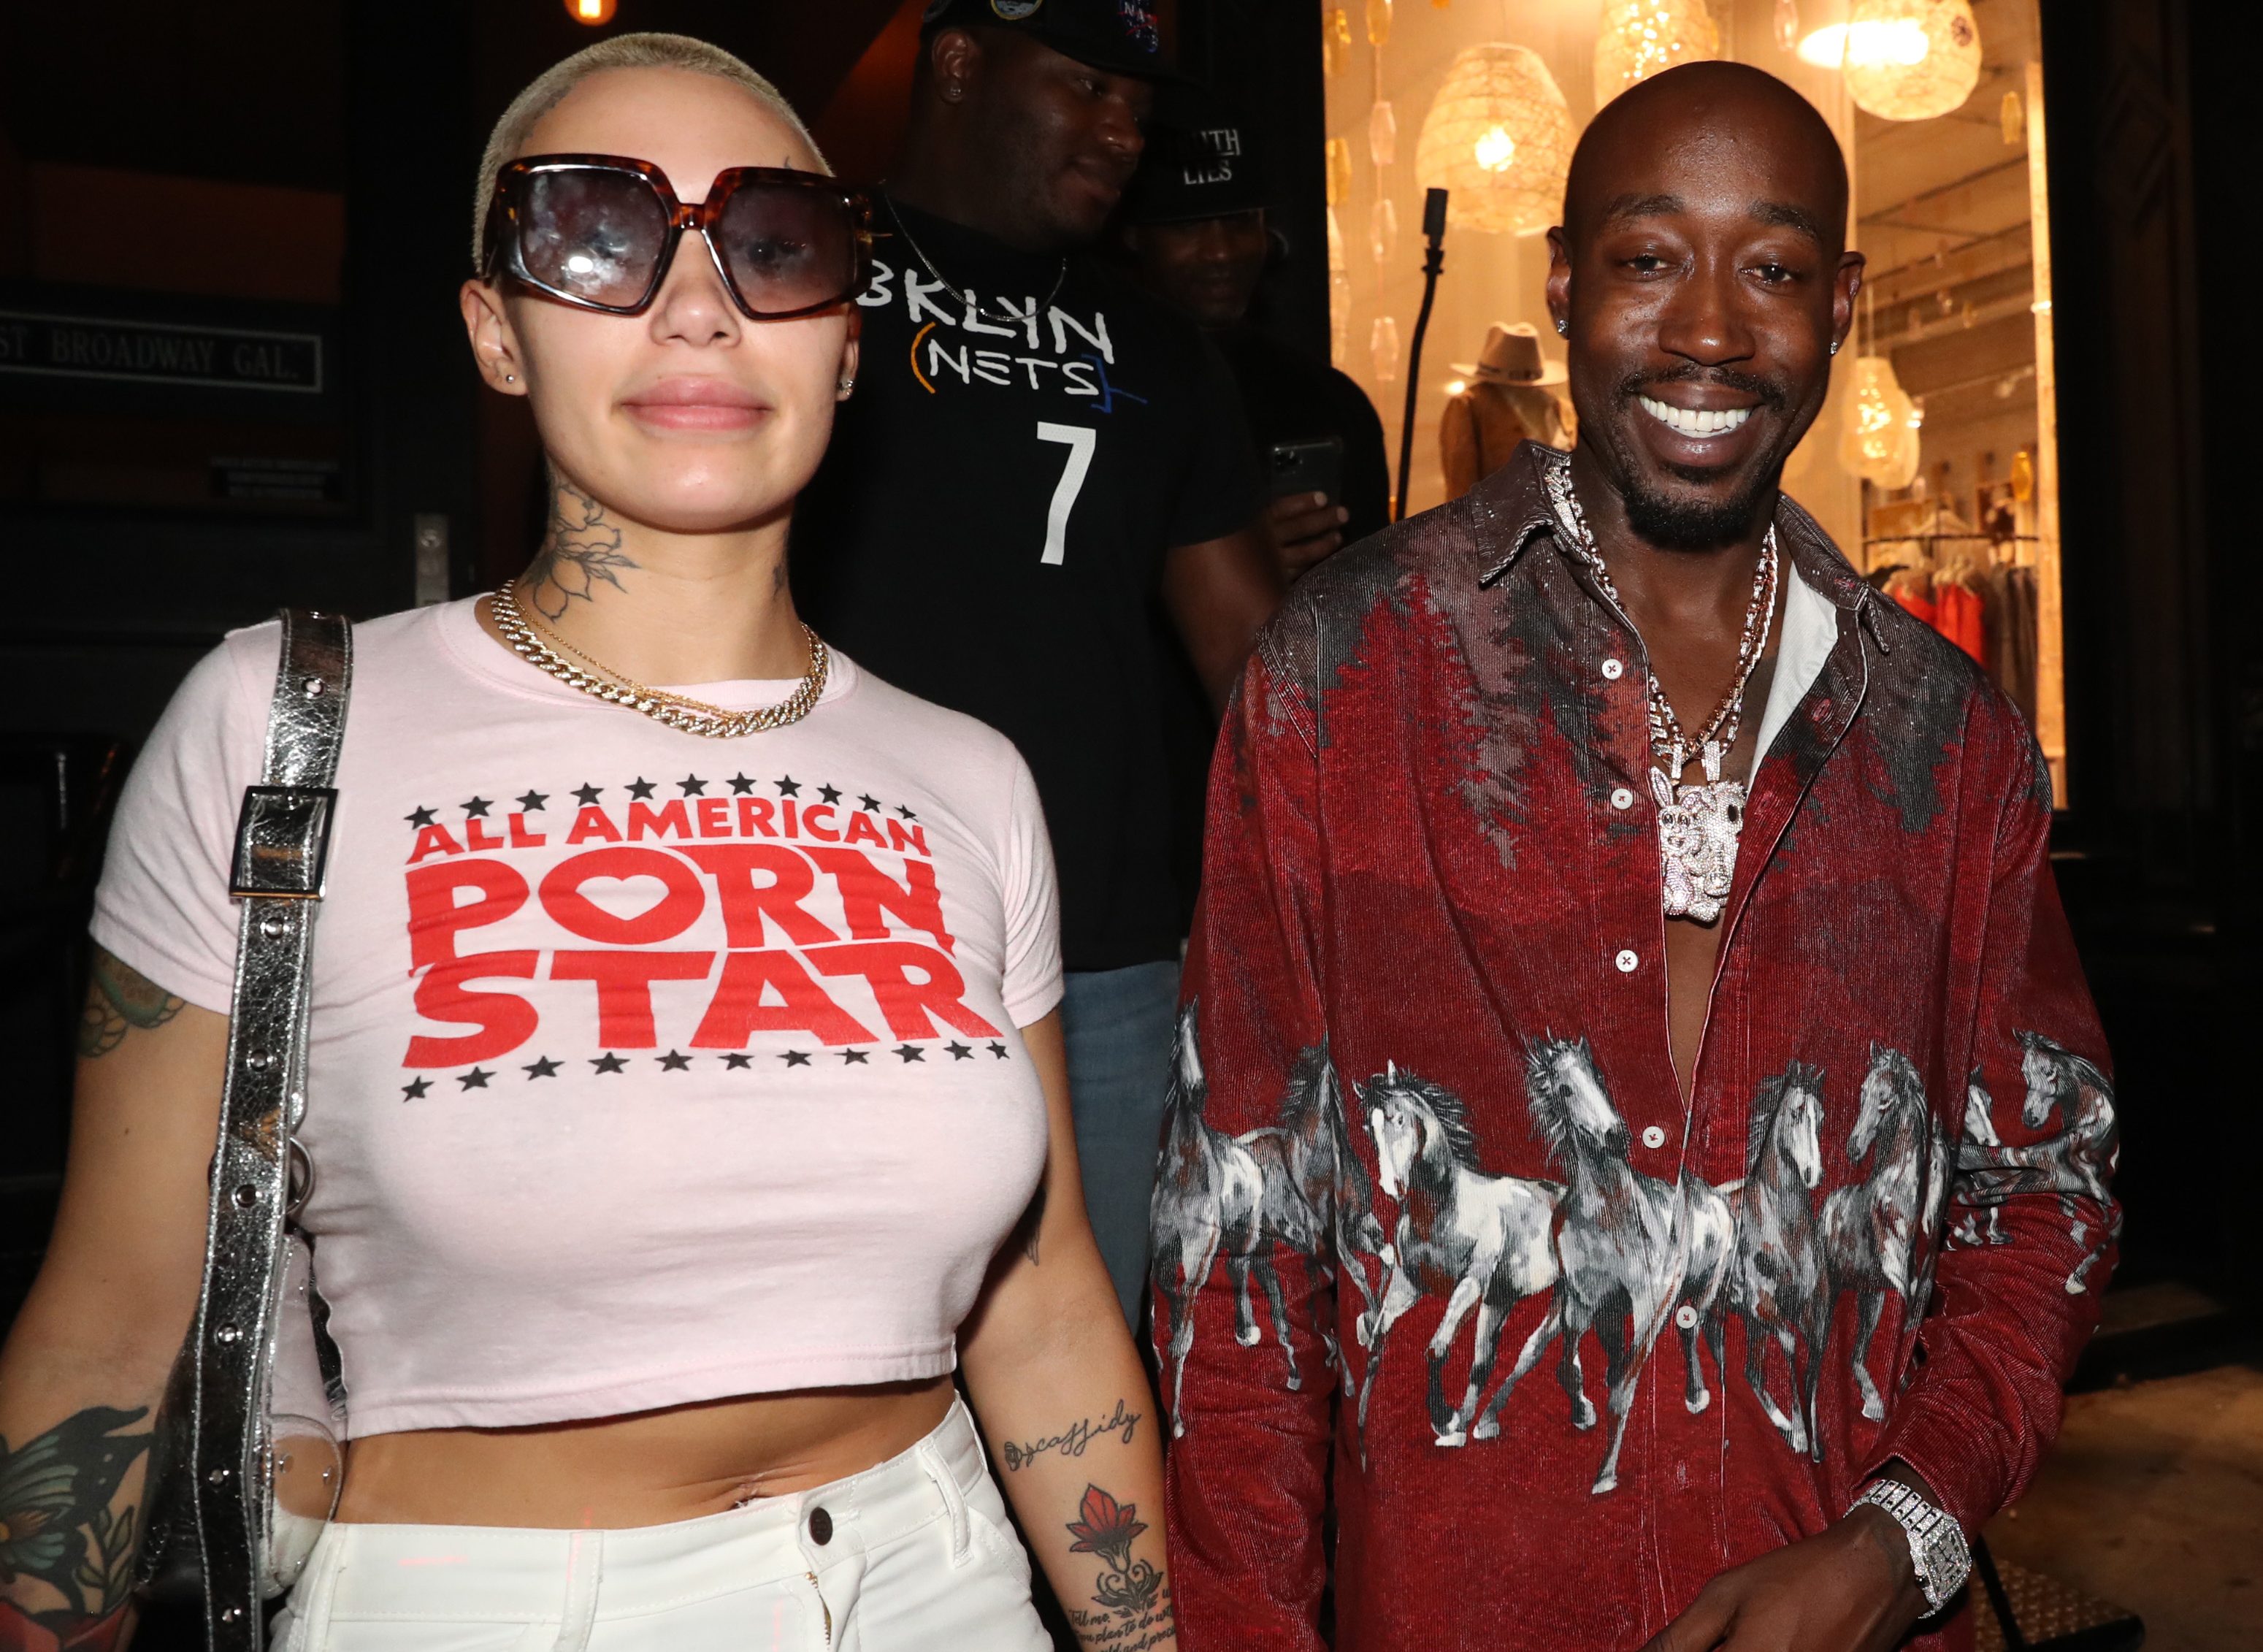 Freddie Gibbs Pornstar Ex-GF Says He Ghosted Her During Pregnancy, She Was Paying His Phone Bill